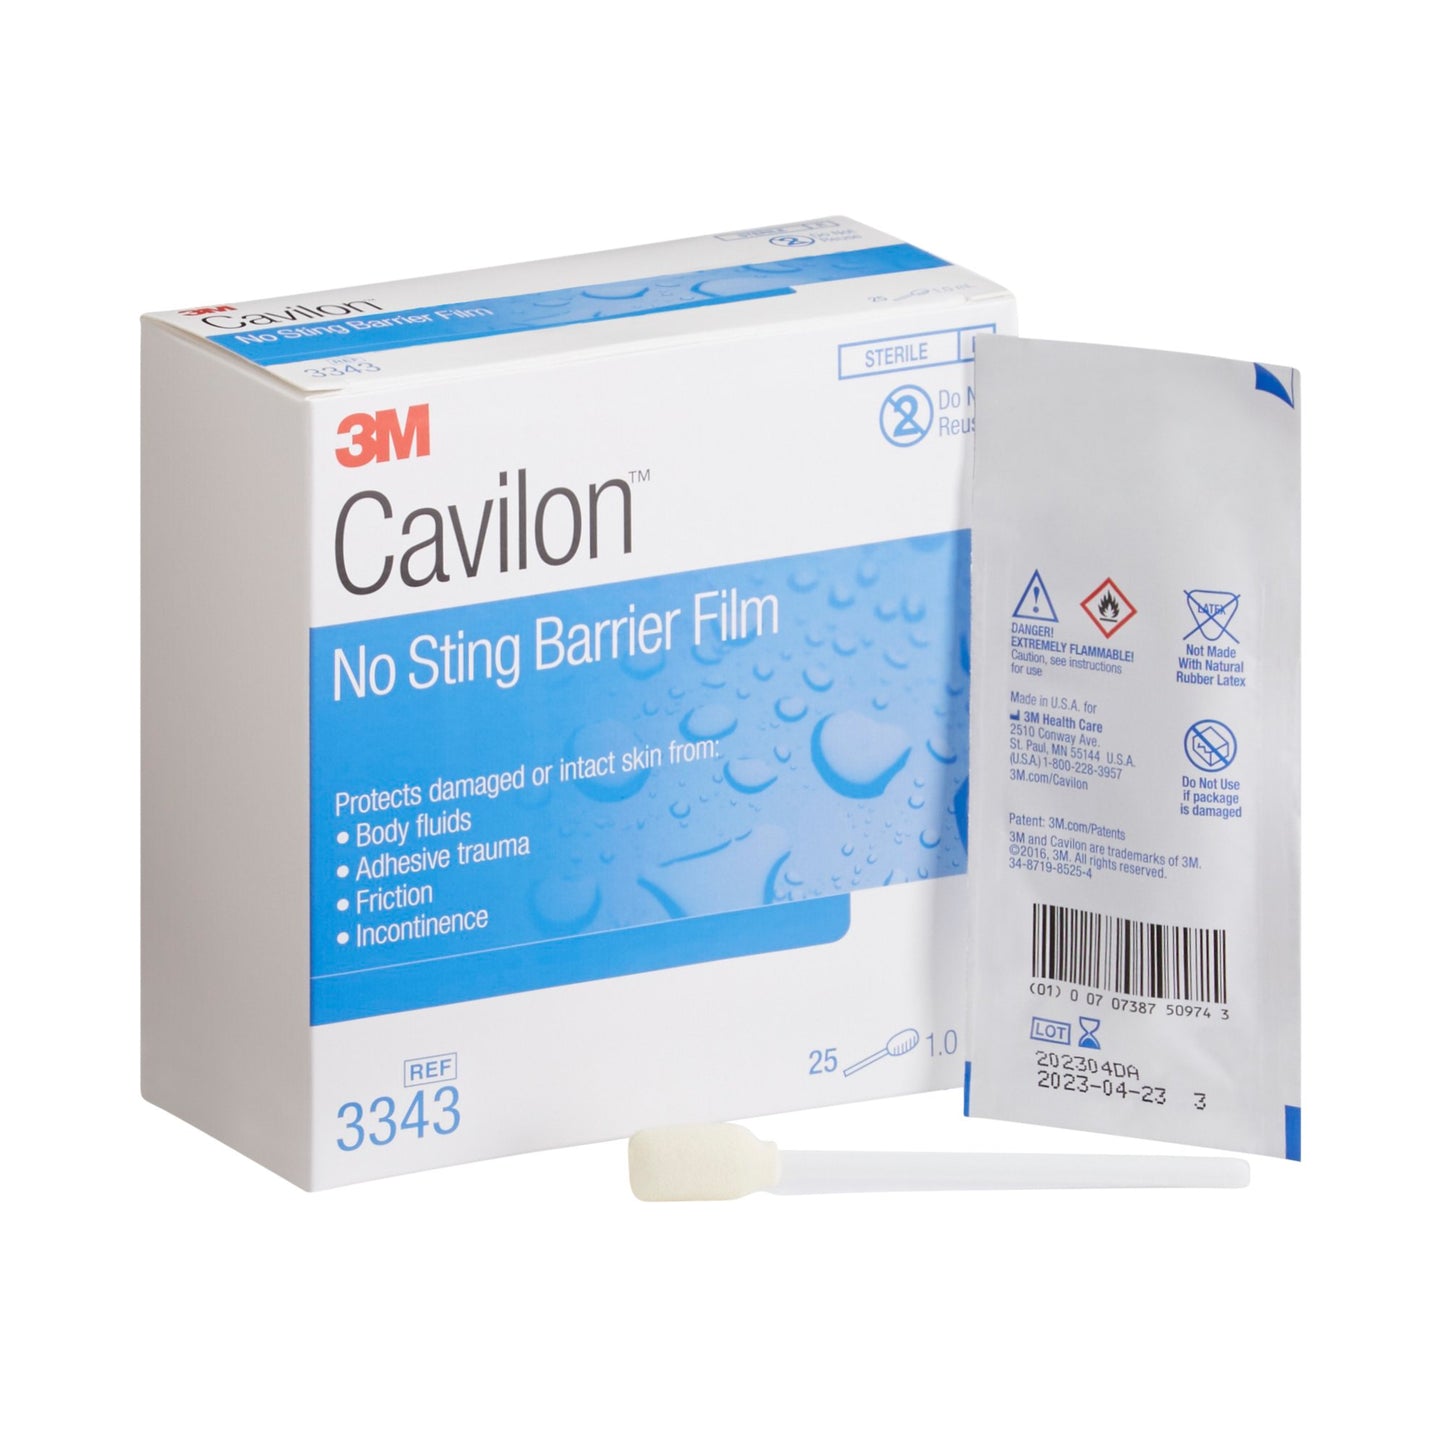 3M Cavilon Barrier Film, No Sting, Alcohol-Free, Conforming, 1.0 Ml, Sold As 1/Each 3M 3343